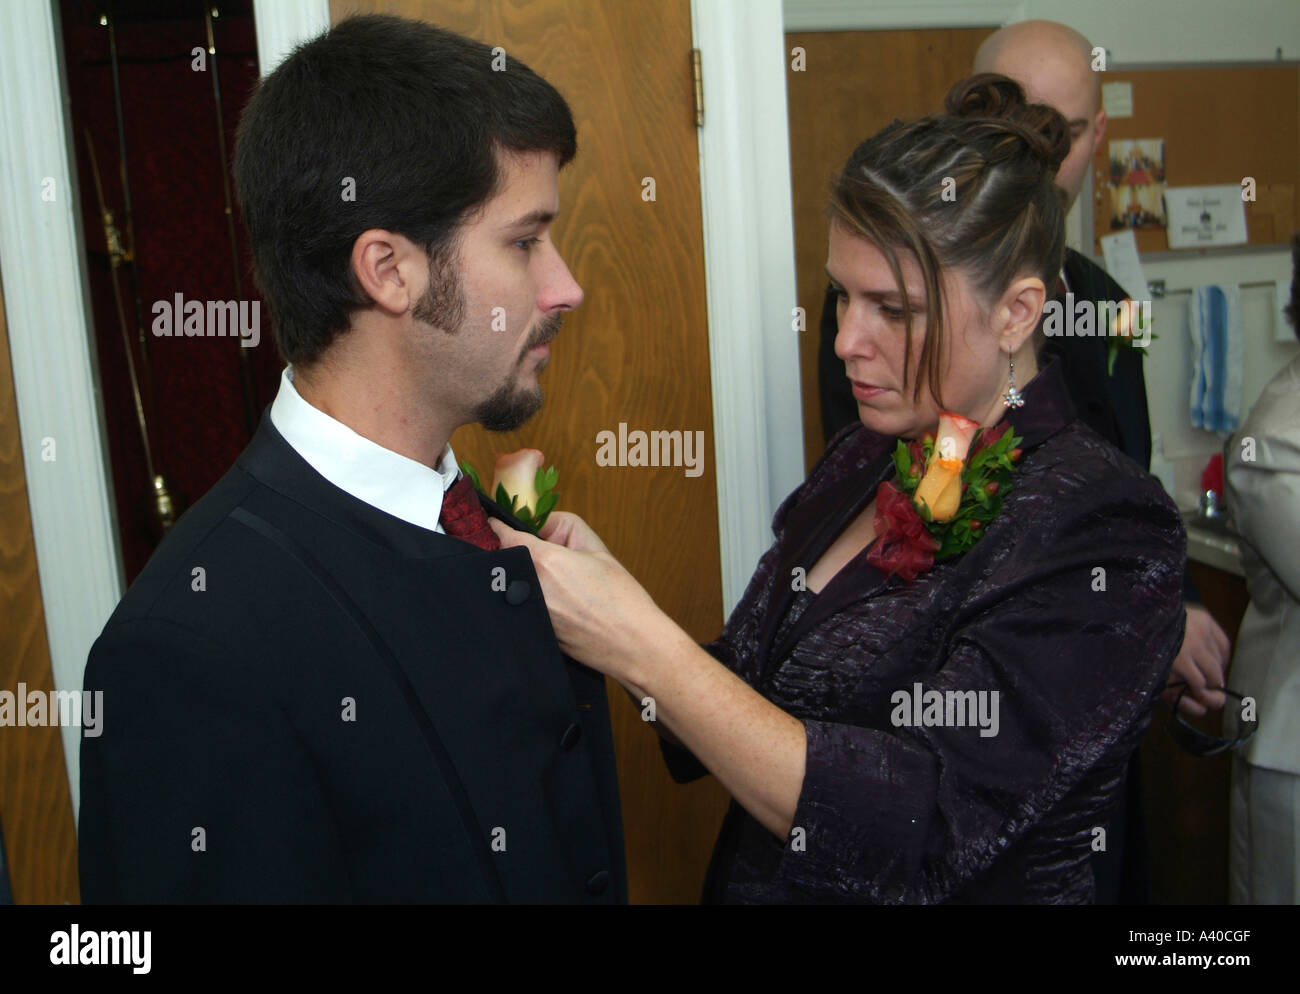 woman pinning corsage on best man at a wedding Stock Photo